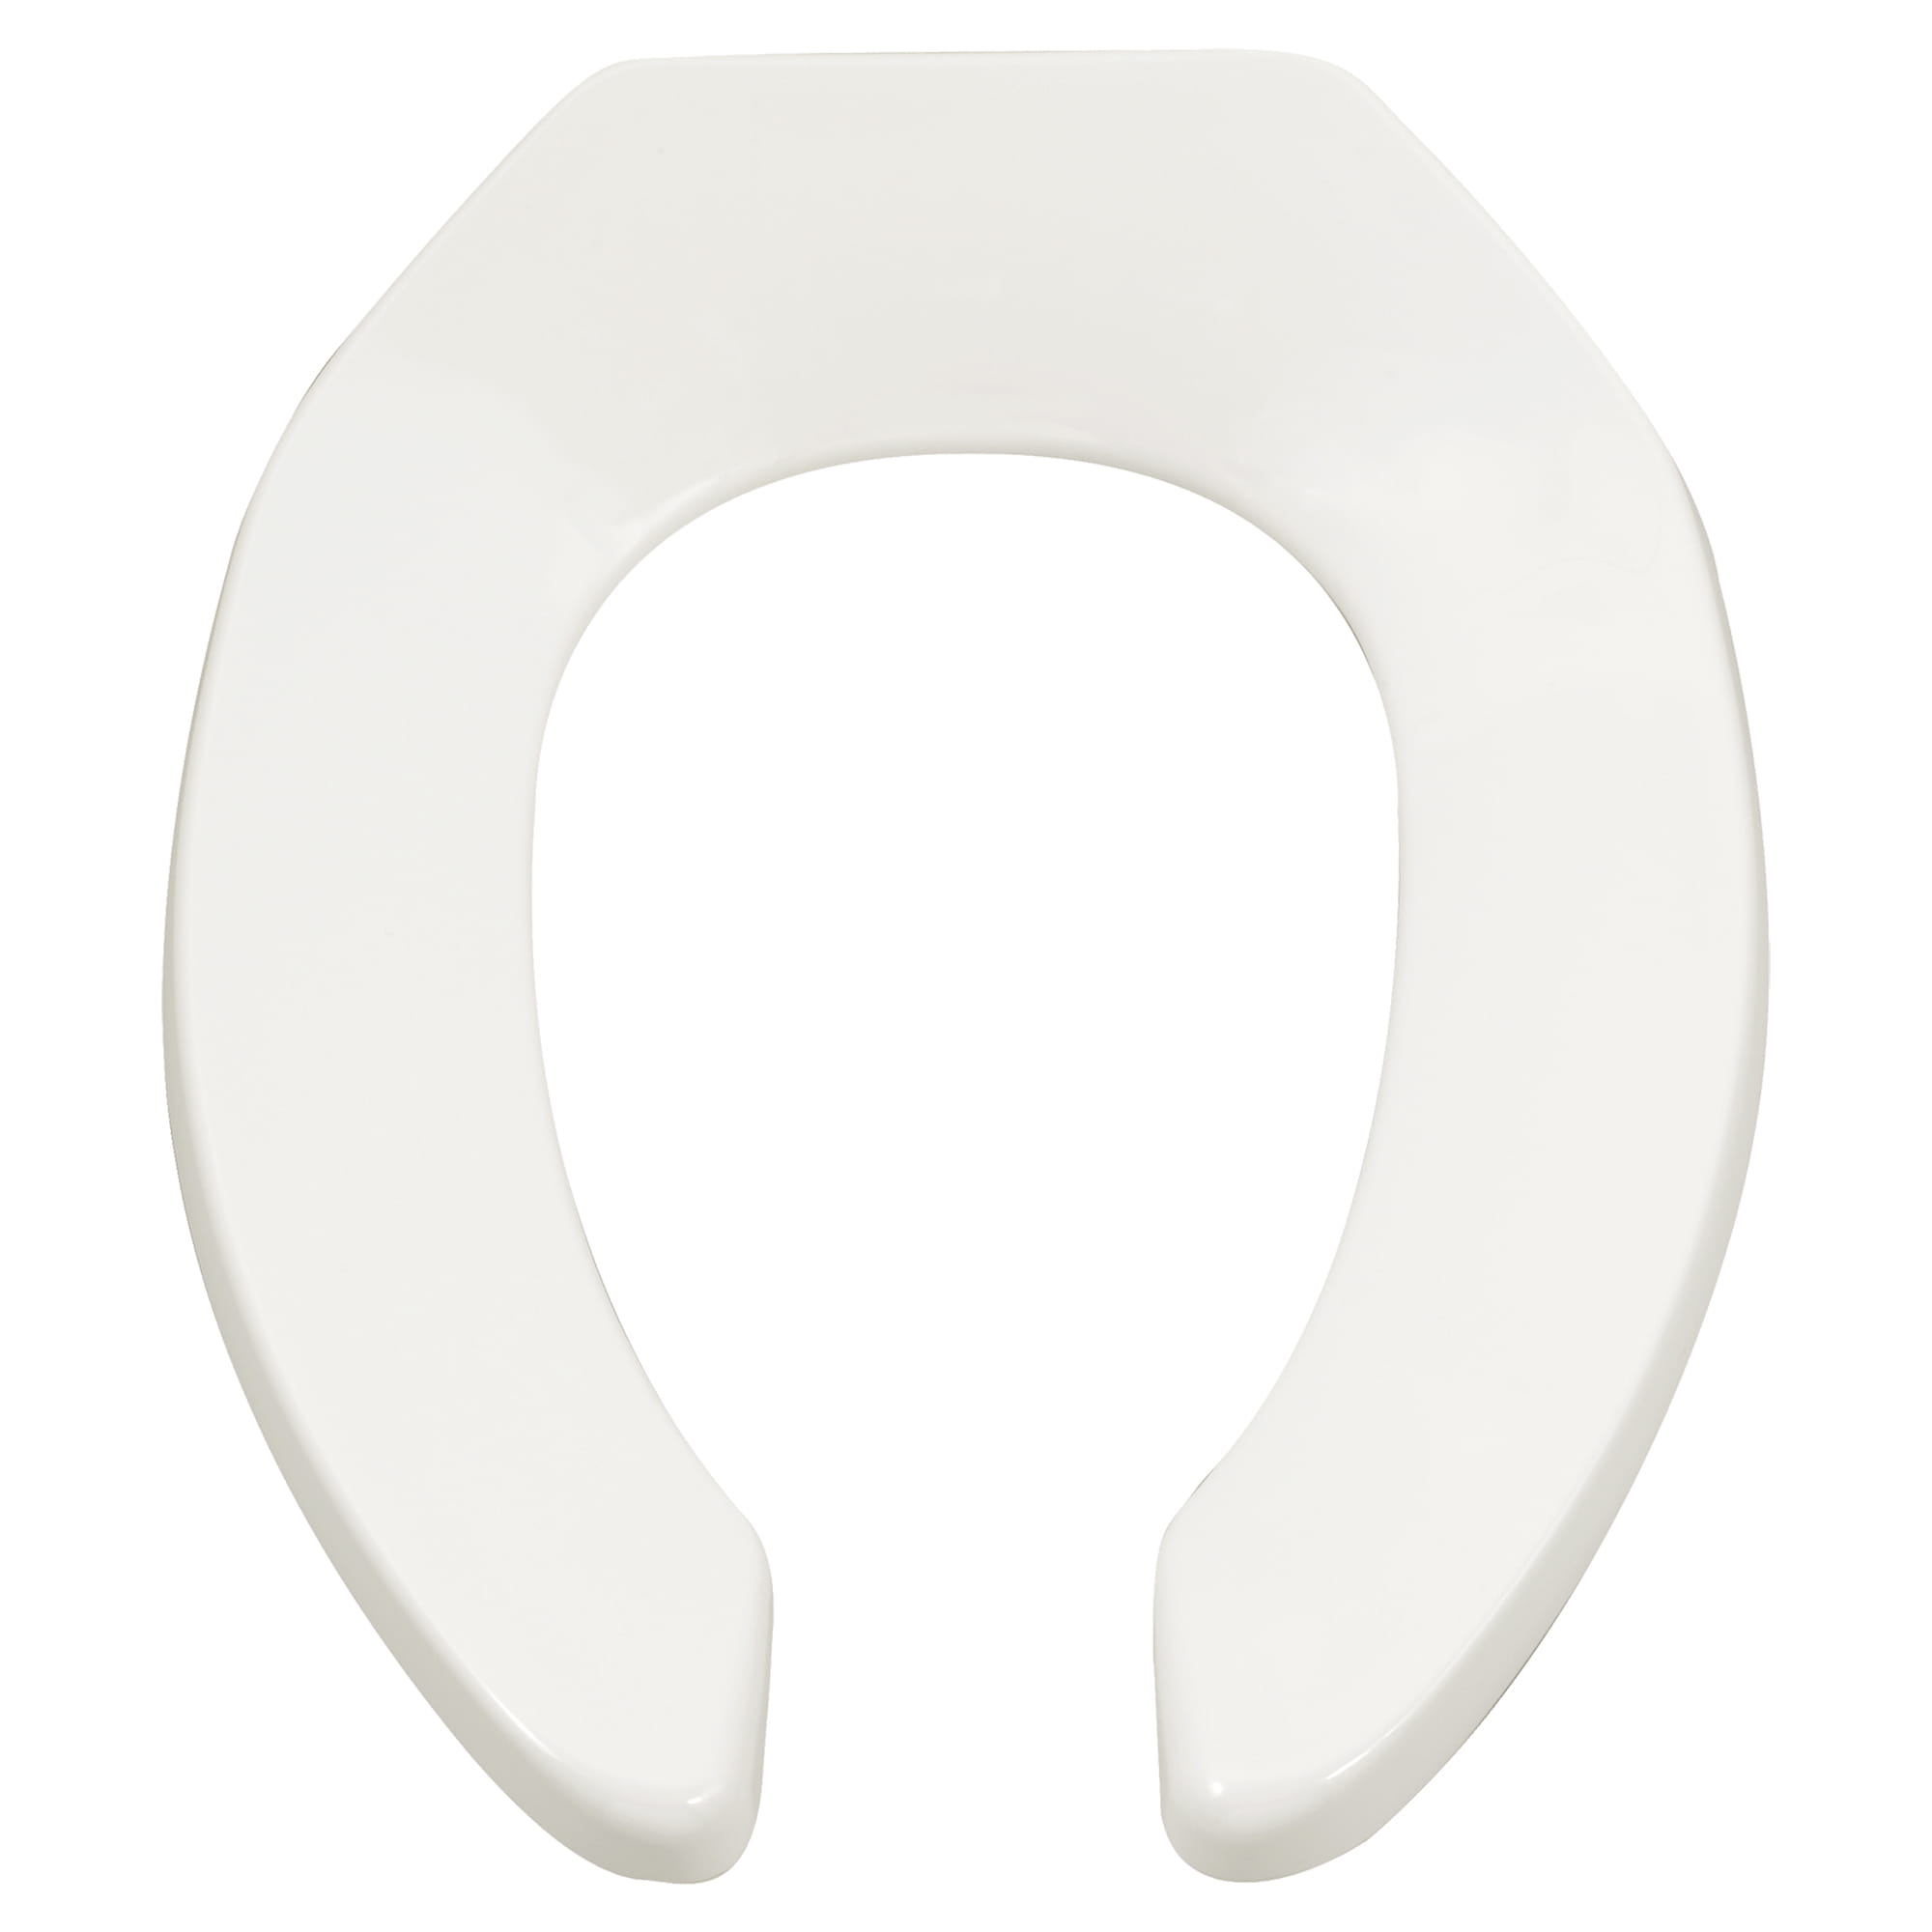 Value Pack of Five: Heavy Duty Commercial Toilet Seats